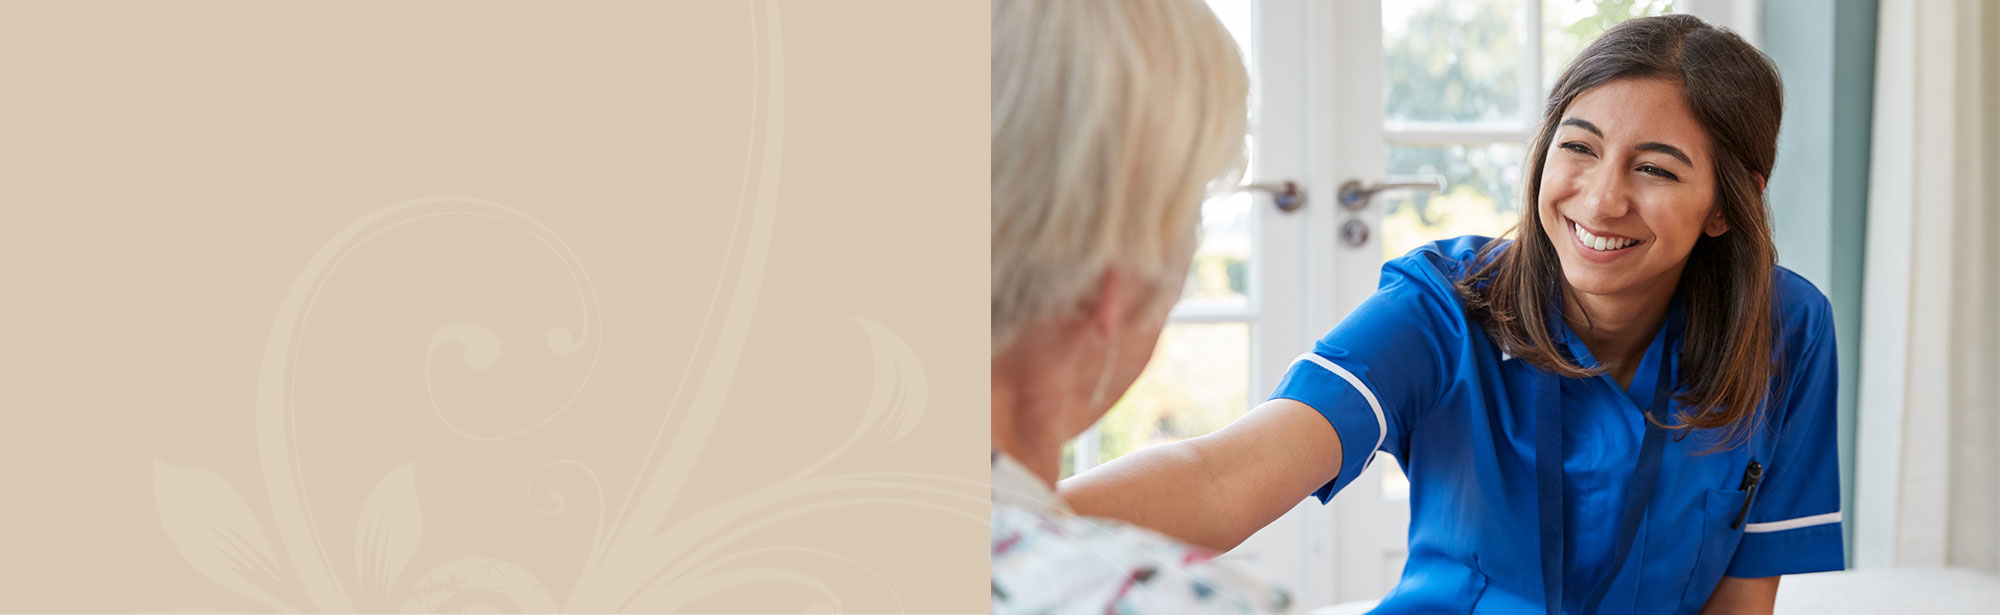 In Maryland we’re Peninsula Home Care and in Delaware we’re Peninsula Home Care at Nanticoke, but no matter where you are, we’re here for you.